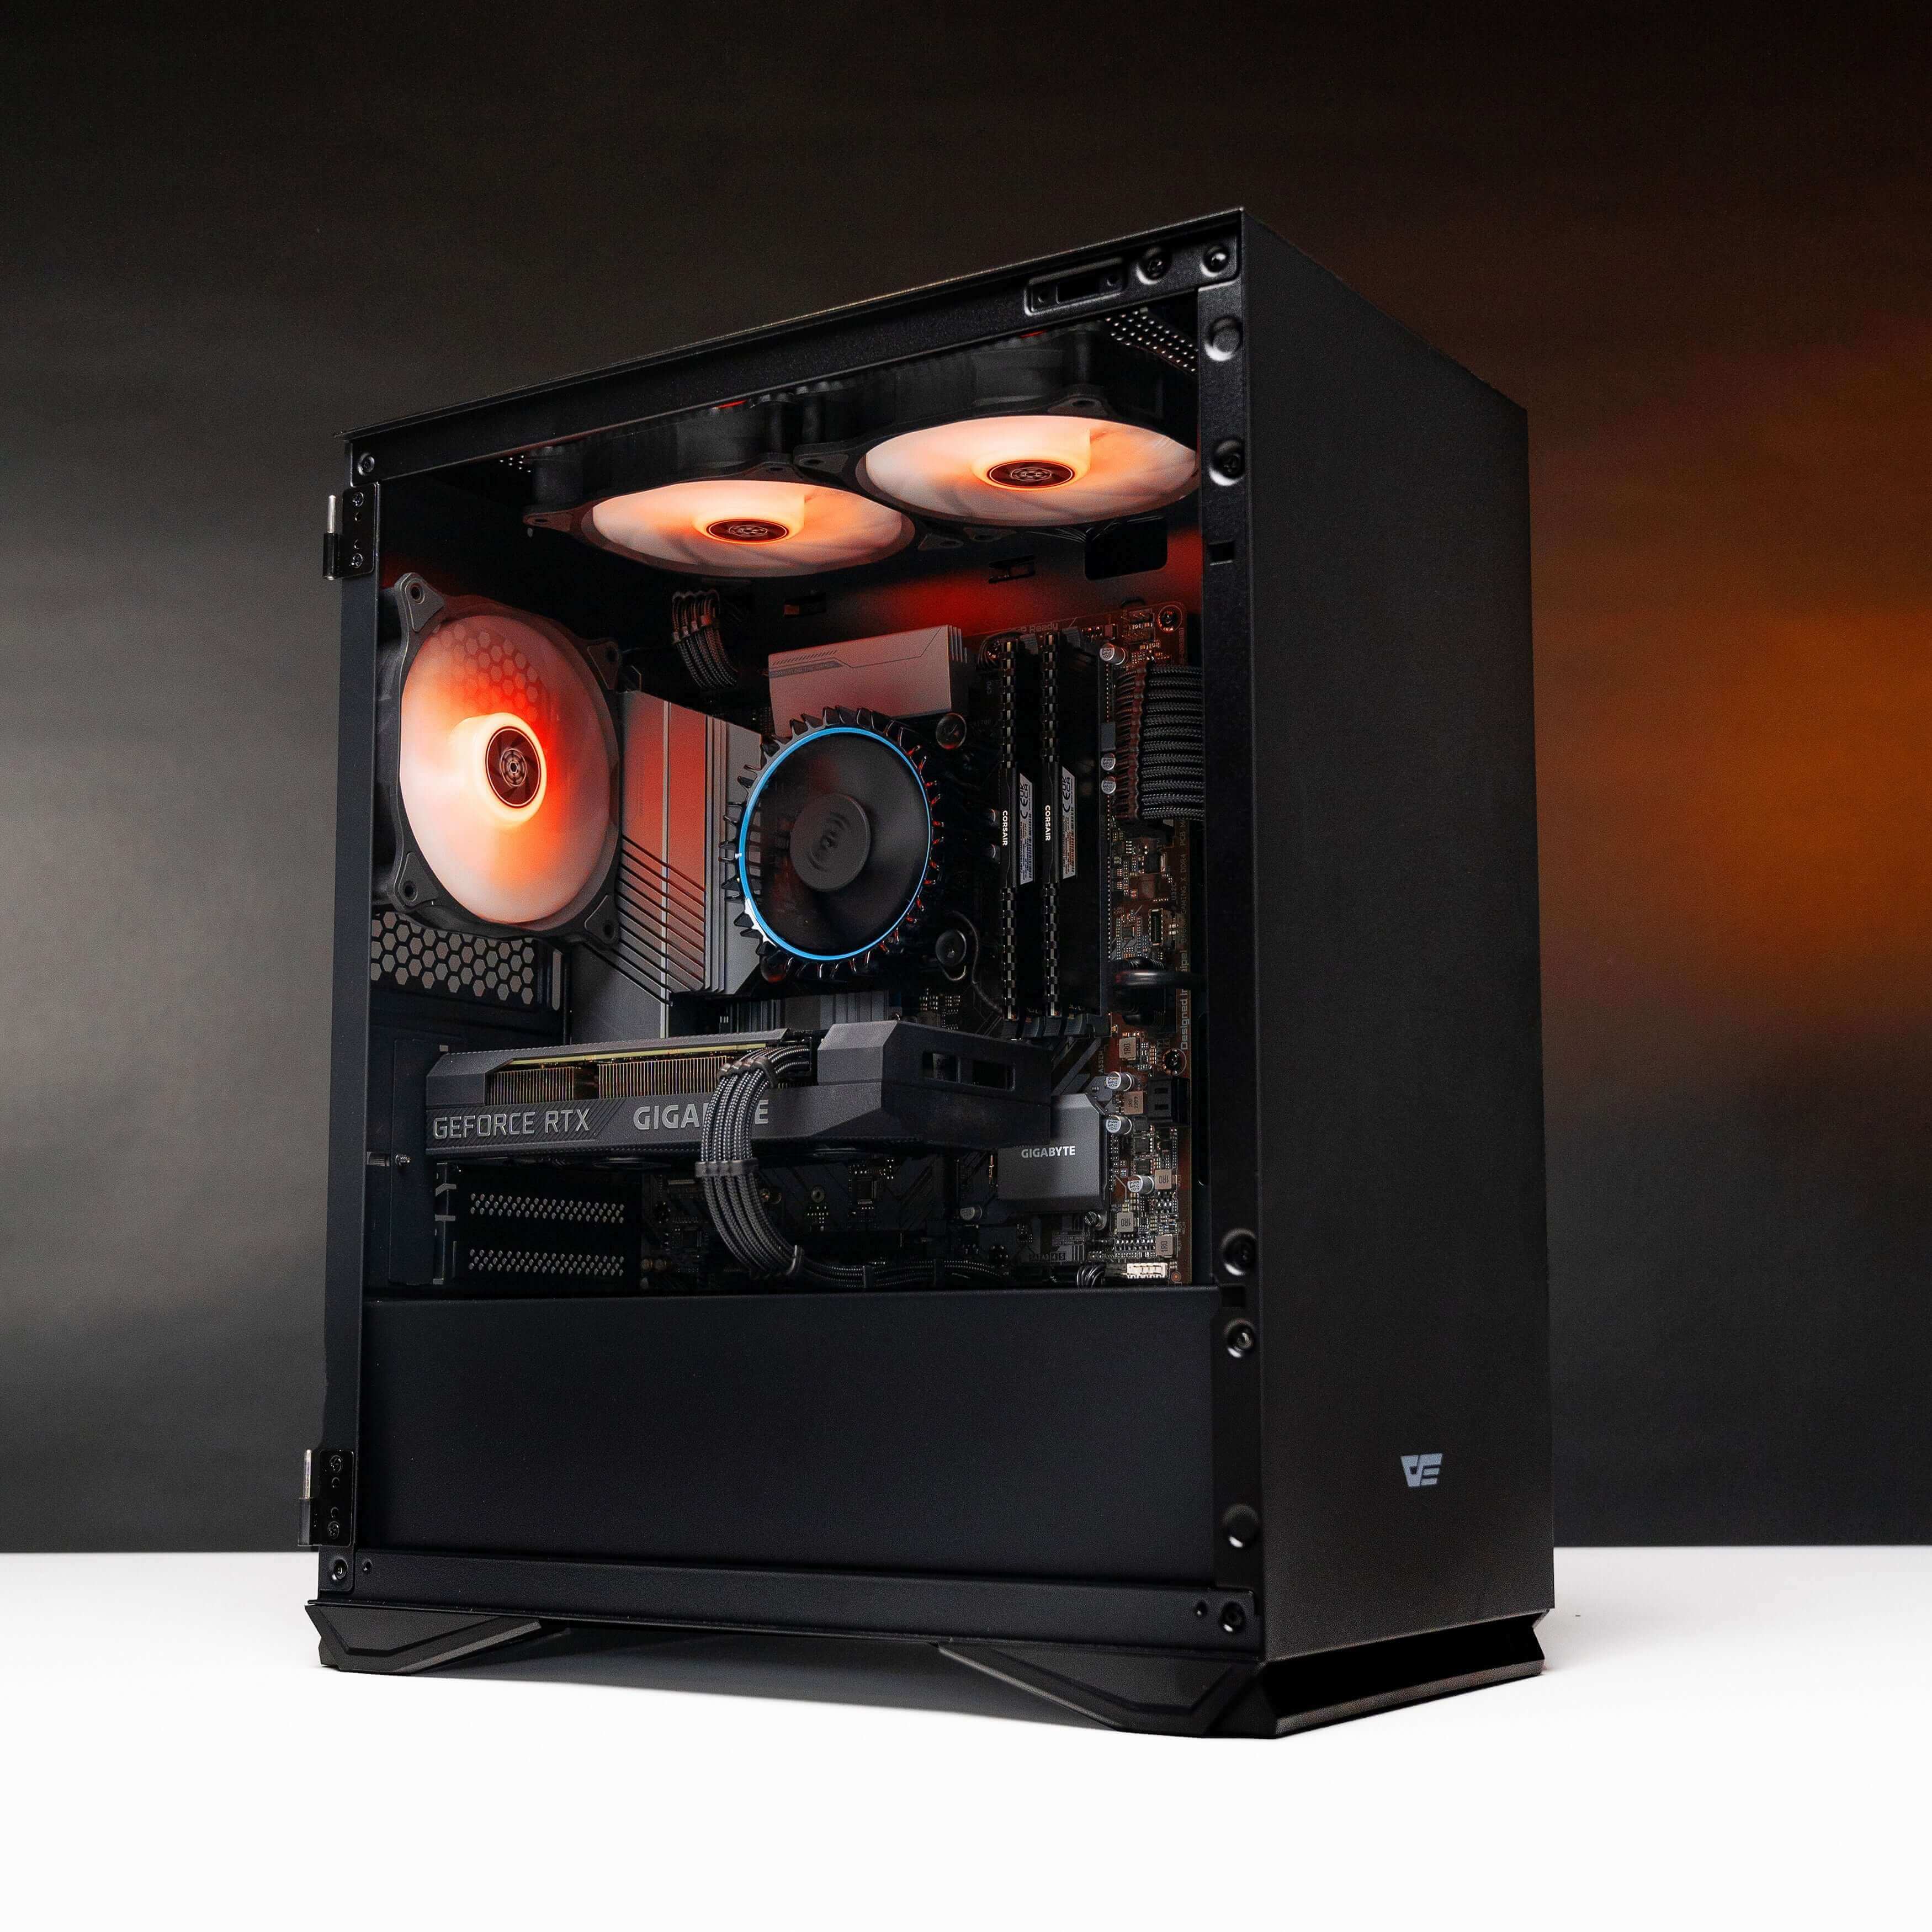 Side view of the powerful ARROW: LVL 5 PC showcases its impressive components, making it a gaming powerhouse.